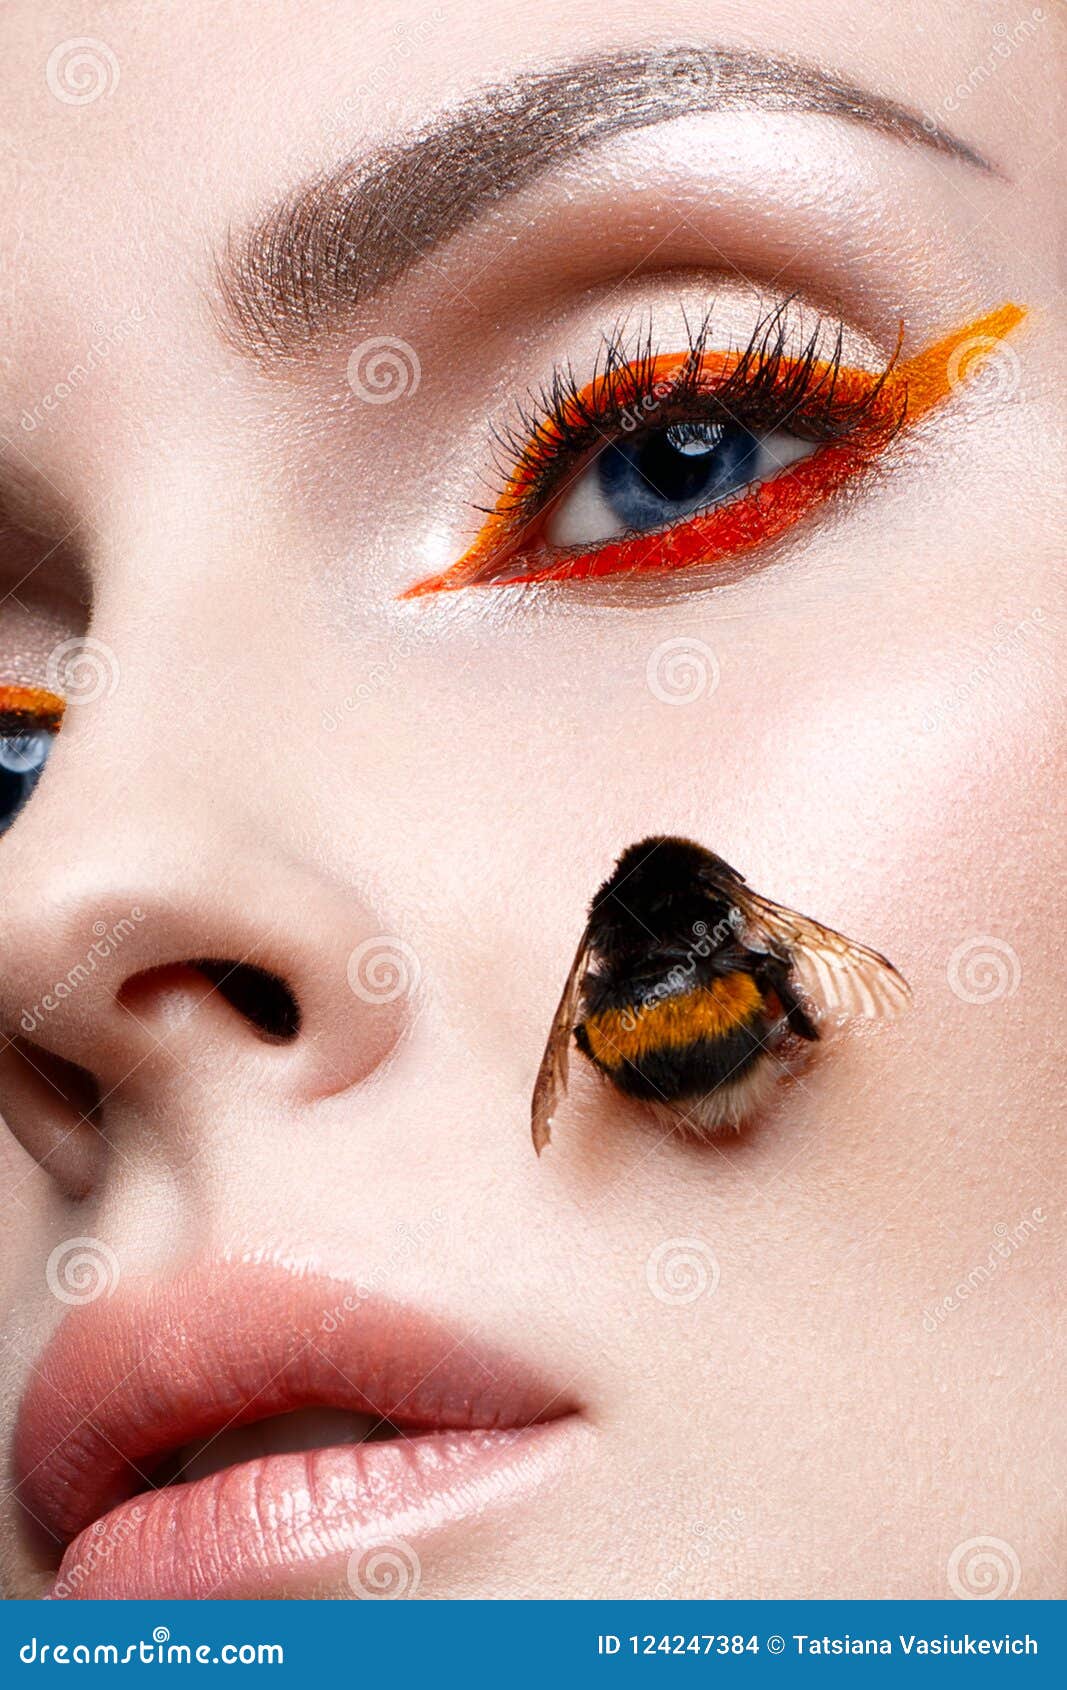 740 Bumblebee Face Photos - Free & Royalty-Free Stock Photos from Dreamstime